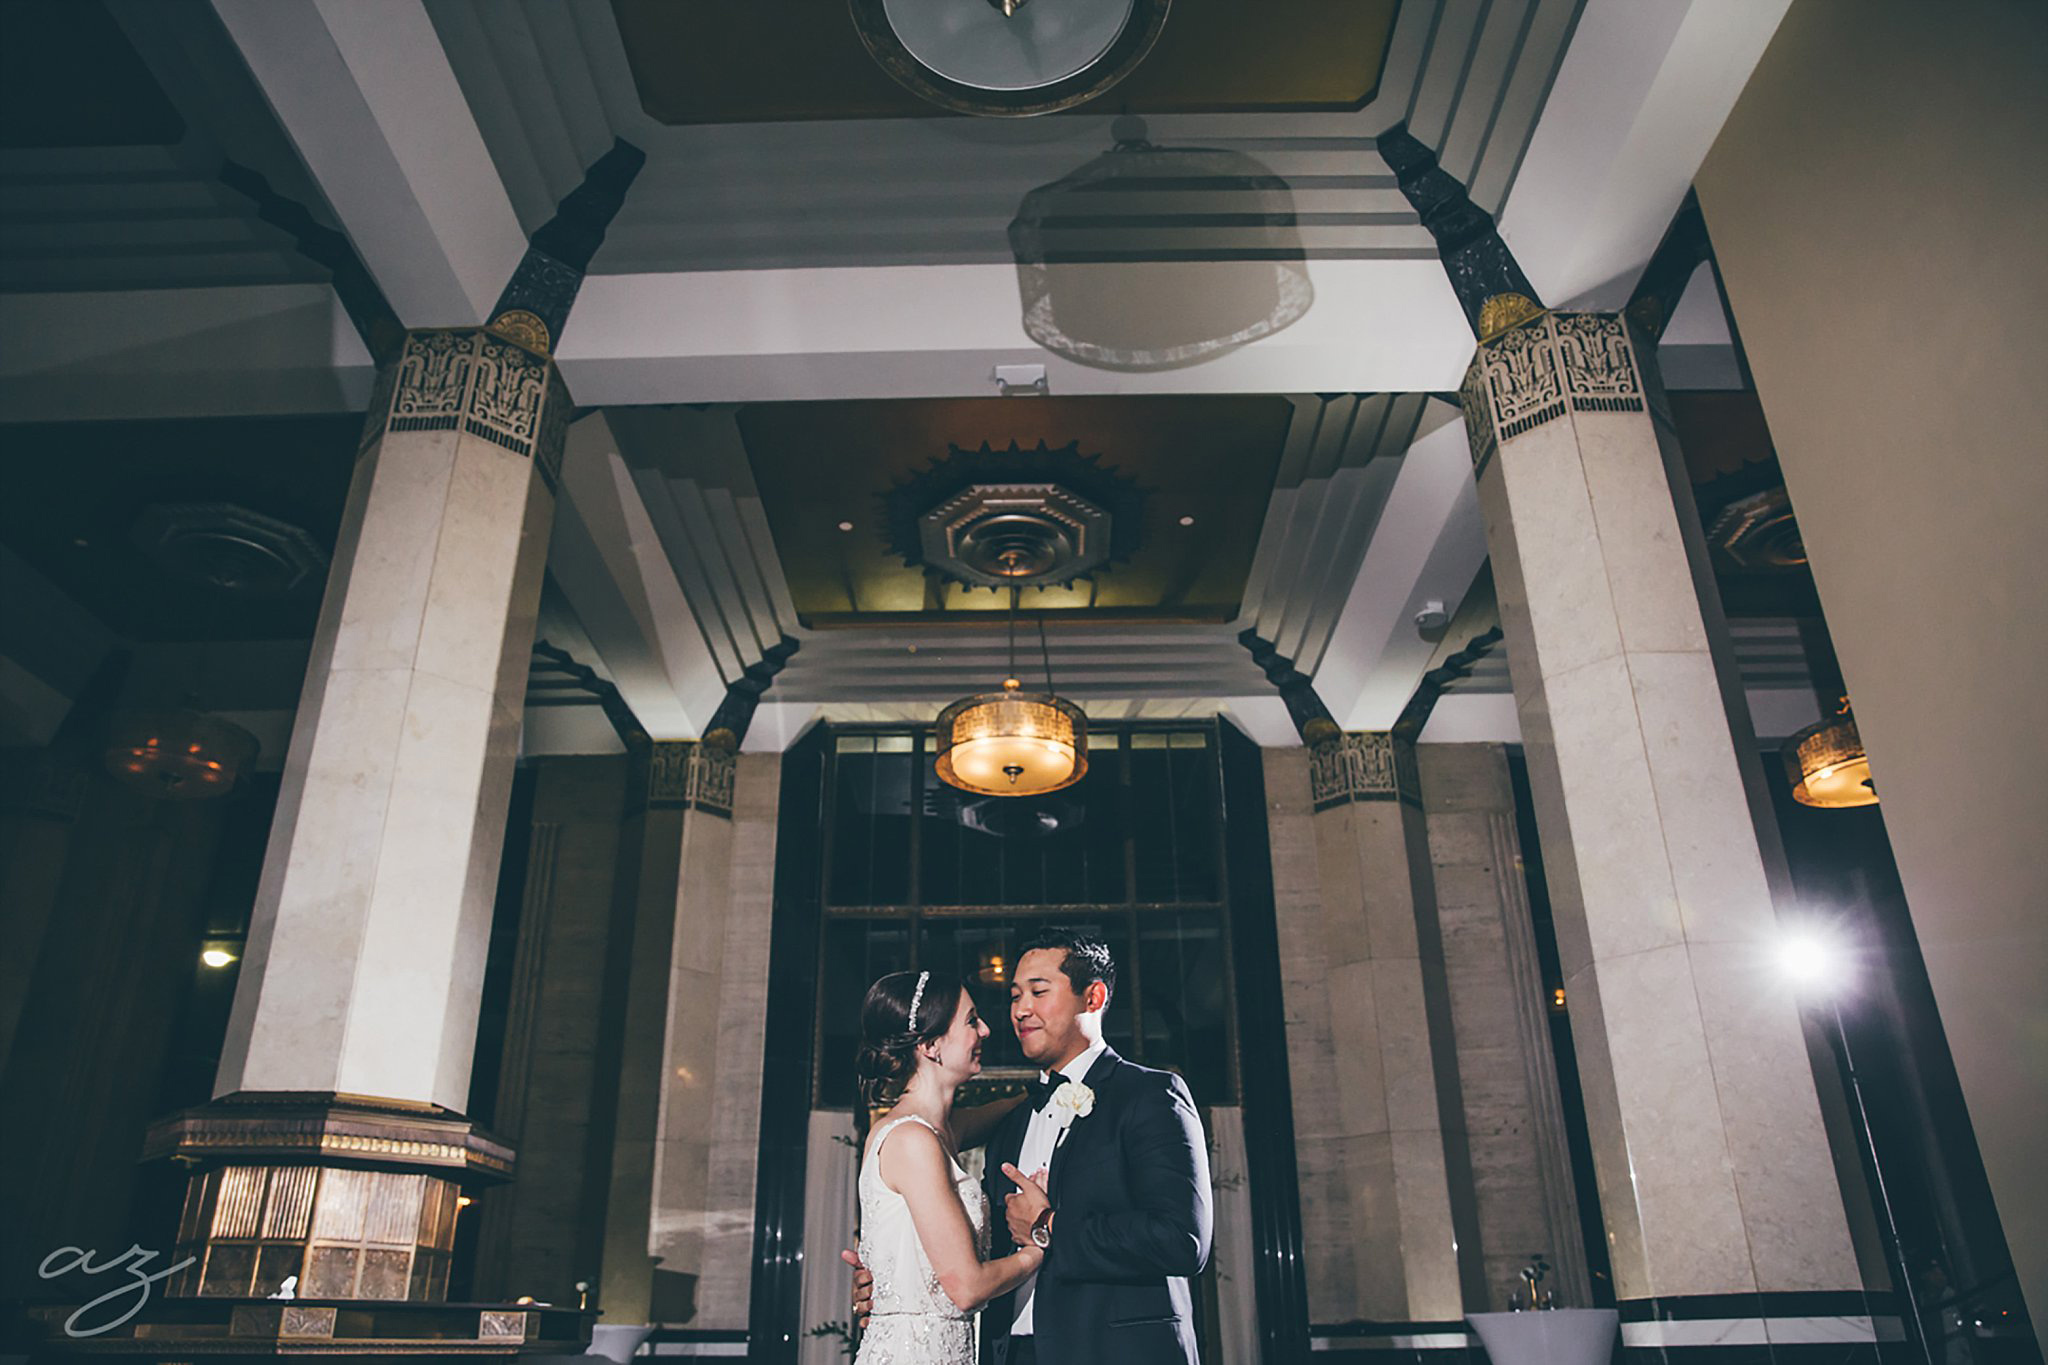 Carlisle Room wedding bride and groom dancing with tall marble columns and art deco